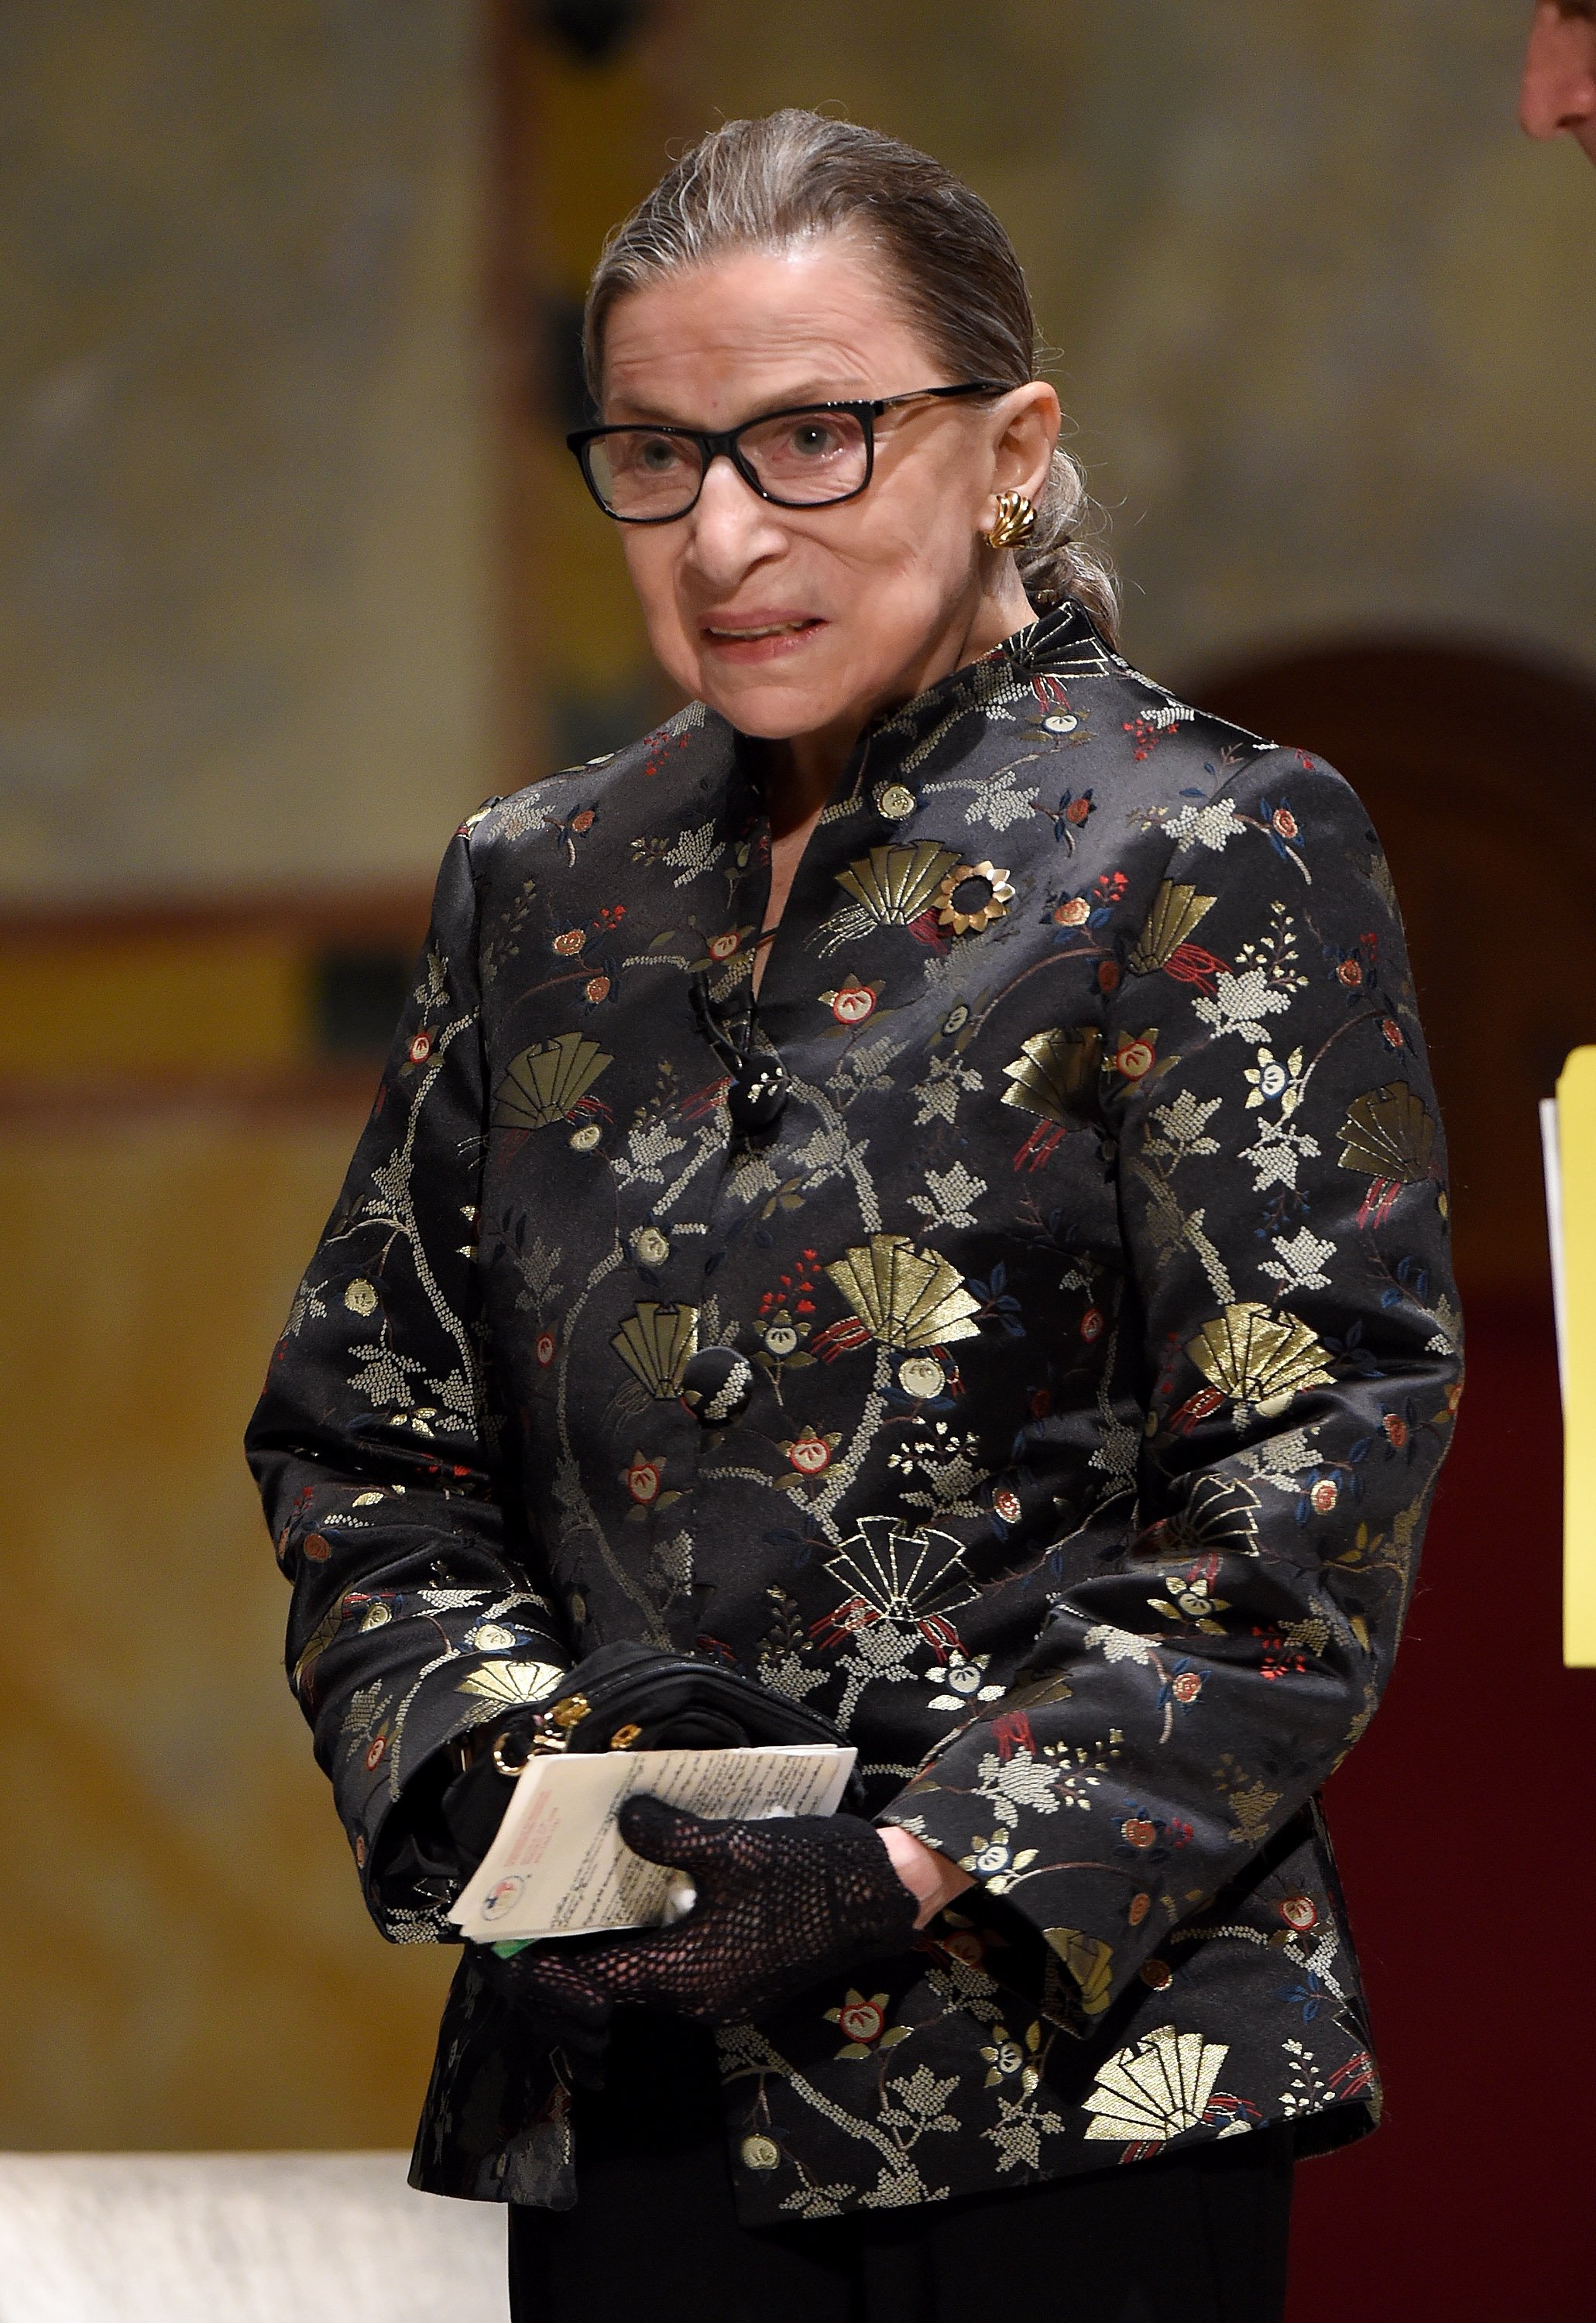 Justice Ruth Bader Ginsburg attends An Historic Evening with Supreme Court Justice Ruth Bader Ginsburg on September 21, 2016 in New York City. | Source: Getty Images.